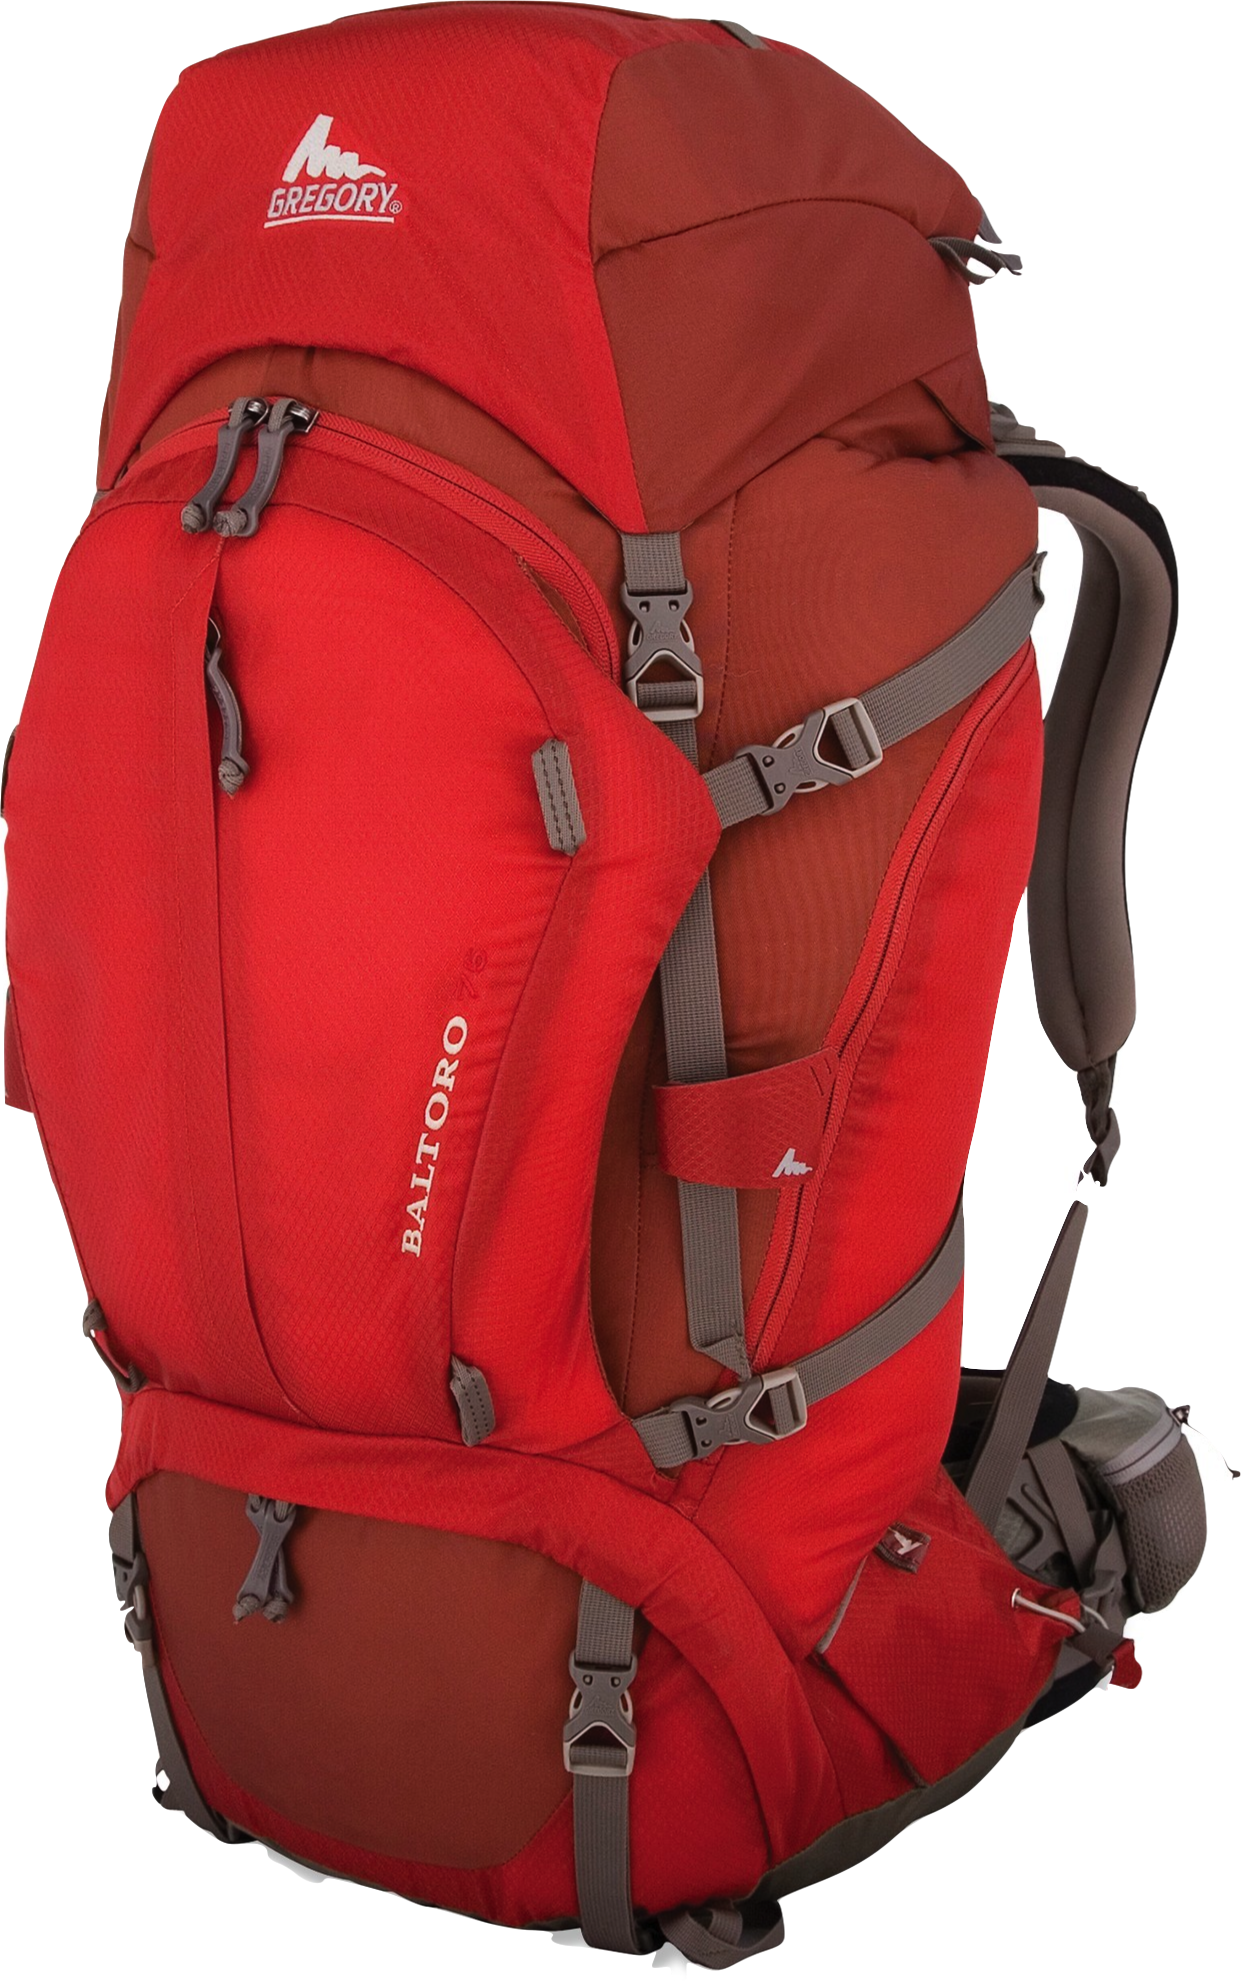 clipart backpack red bag